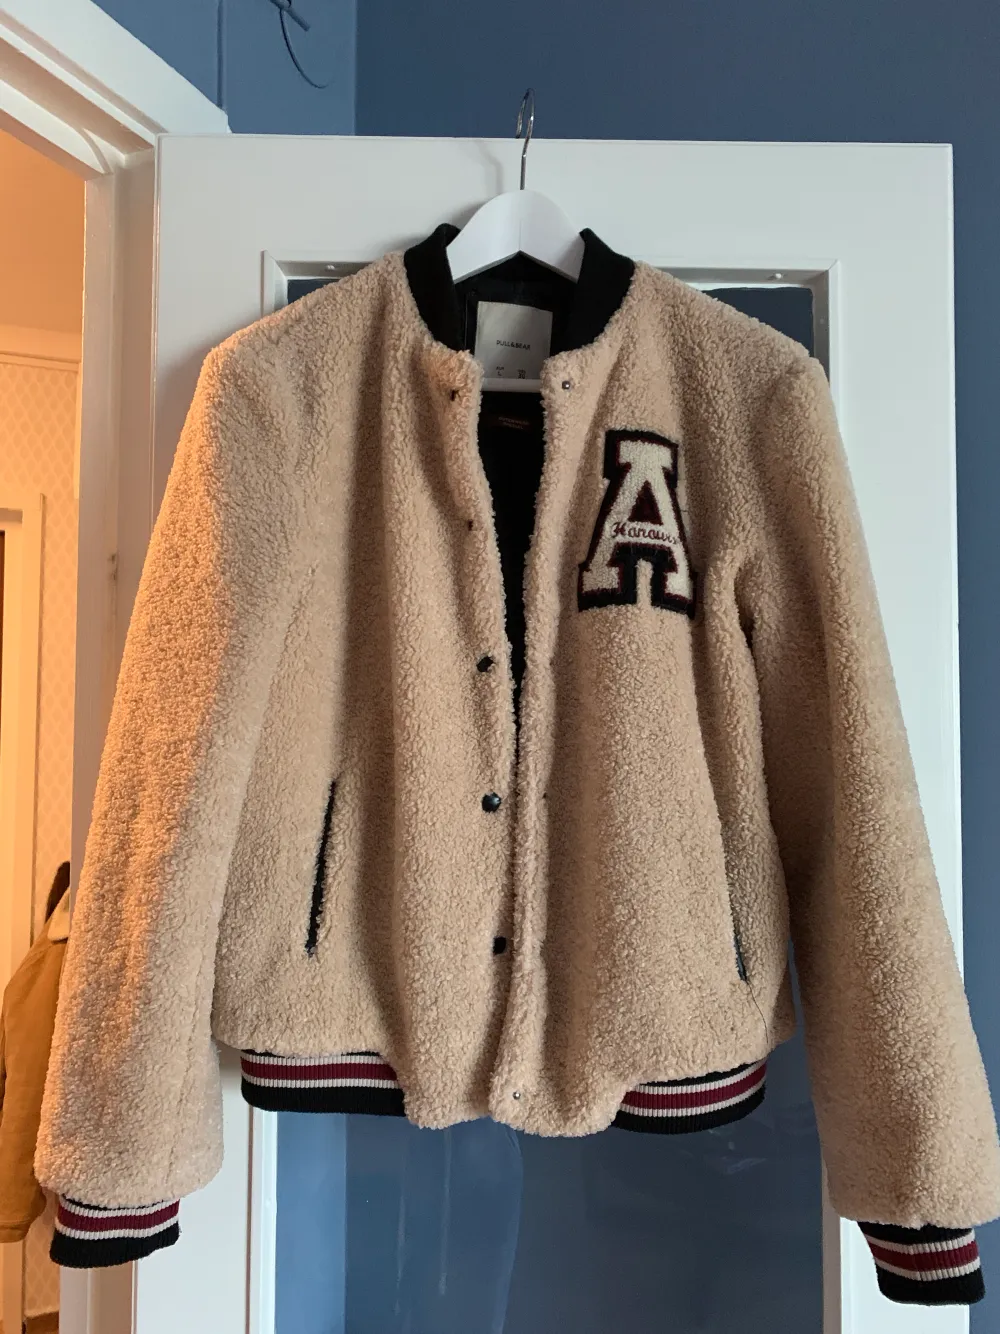 very good condition, size L but fits me a bit oversized as a S/M. fluffy with a quilted inside. has two pockets and buttons up. bought for 500sek if i remember correctly . Jackor.